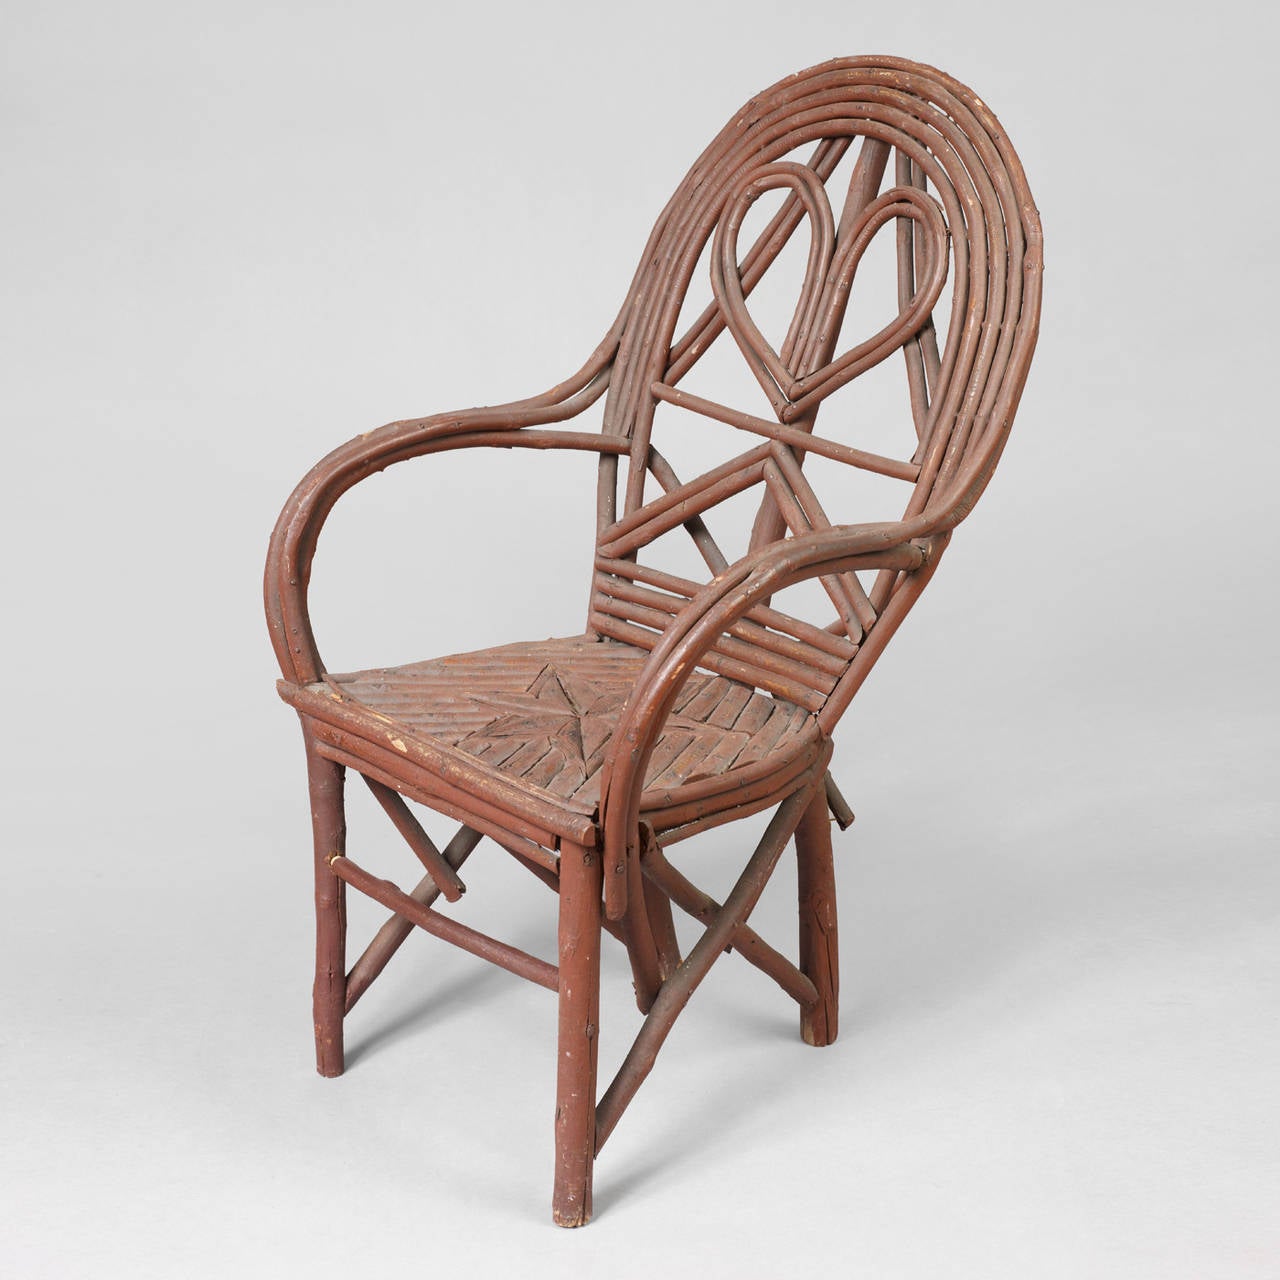 New York, probably Adirondack region, 1870-1890.
Bentwood saplings, probably ash or maple.
Excellent condition, retaining original red paint finish.
Rustic bentwood furniture was more commonly found in the Adirondack region, although it was made